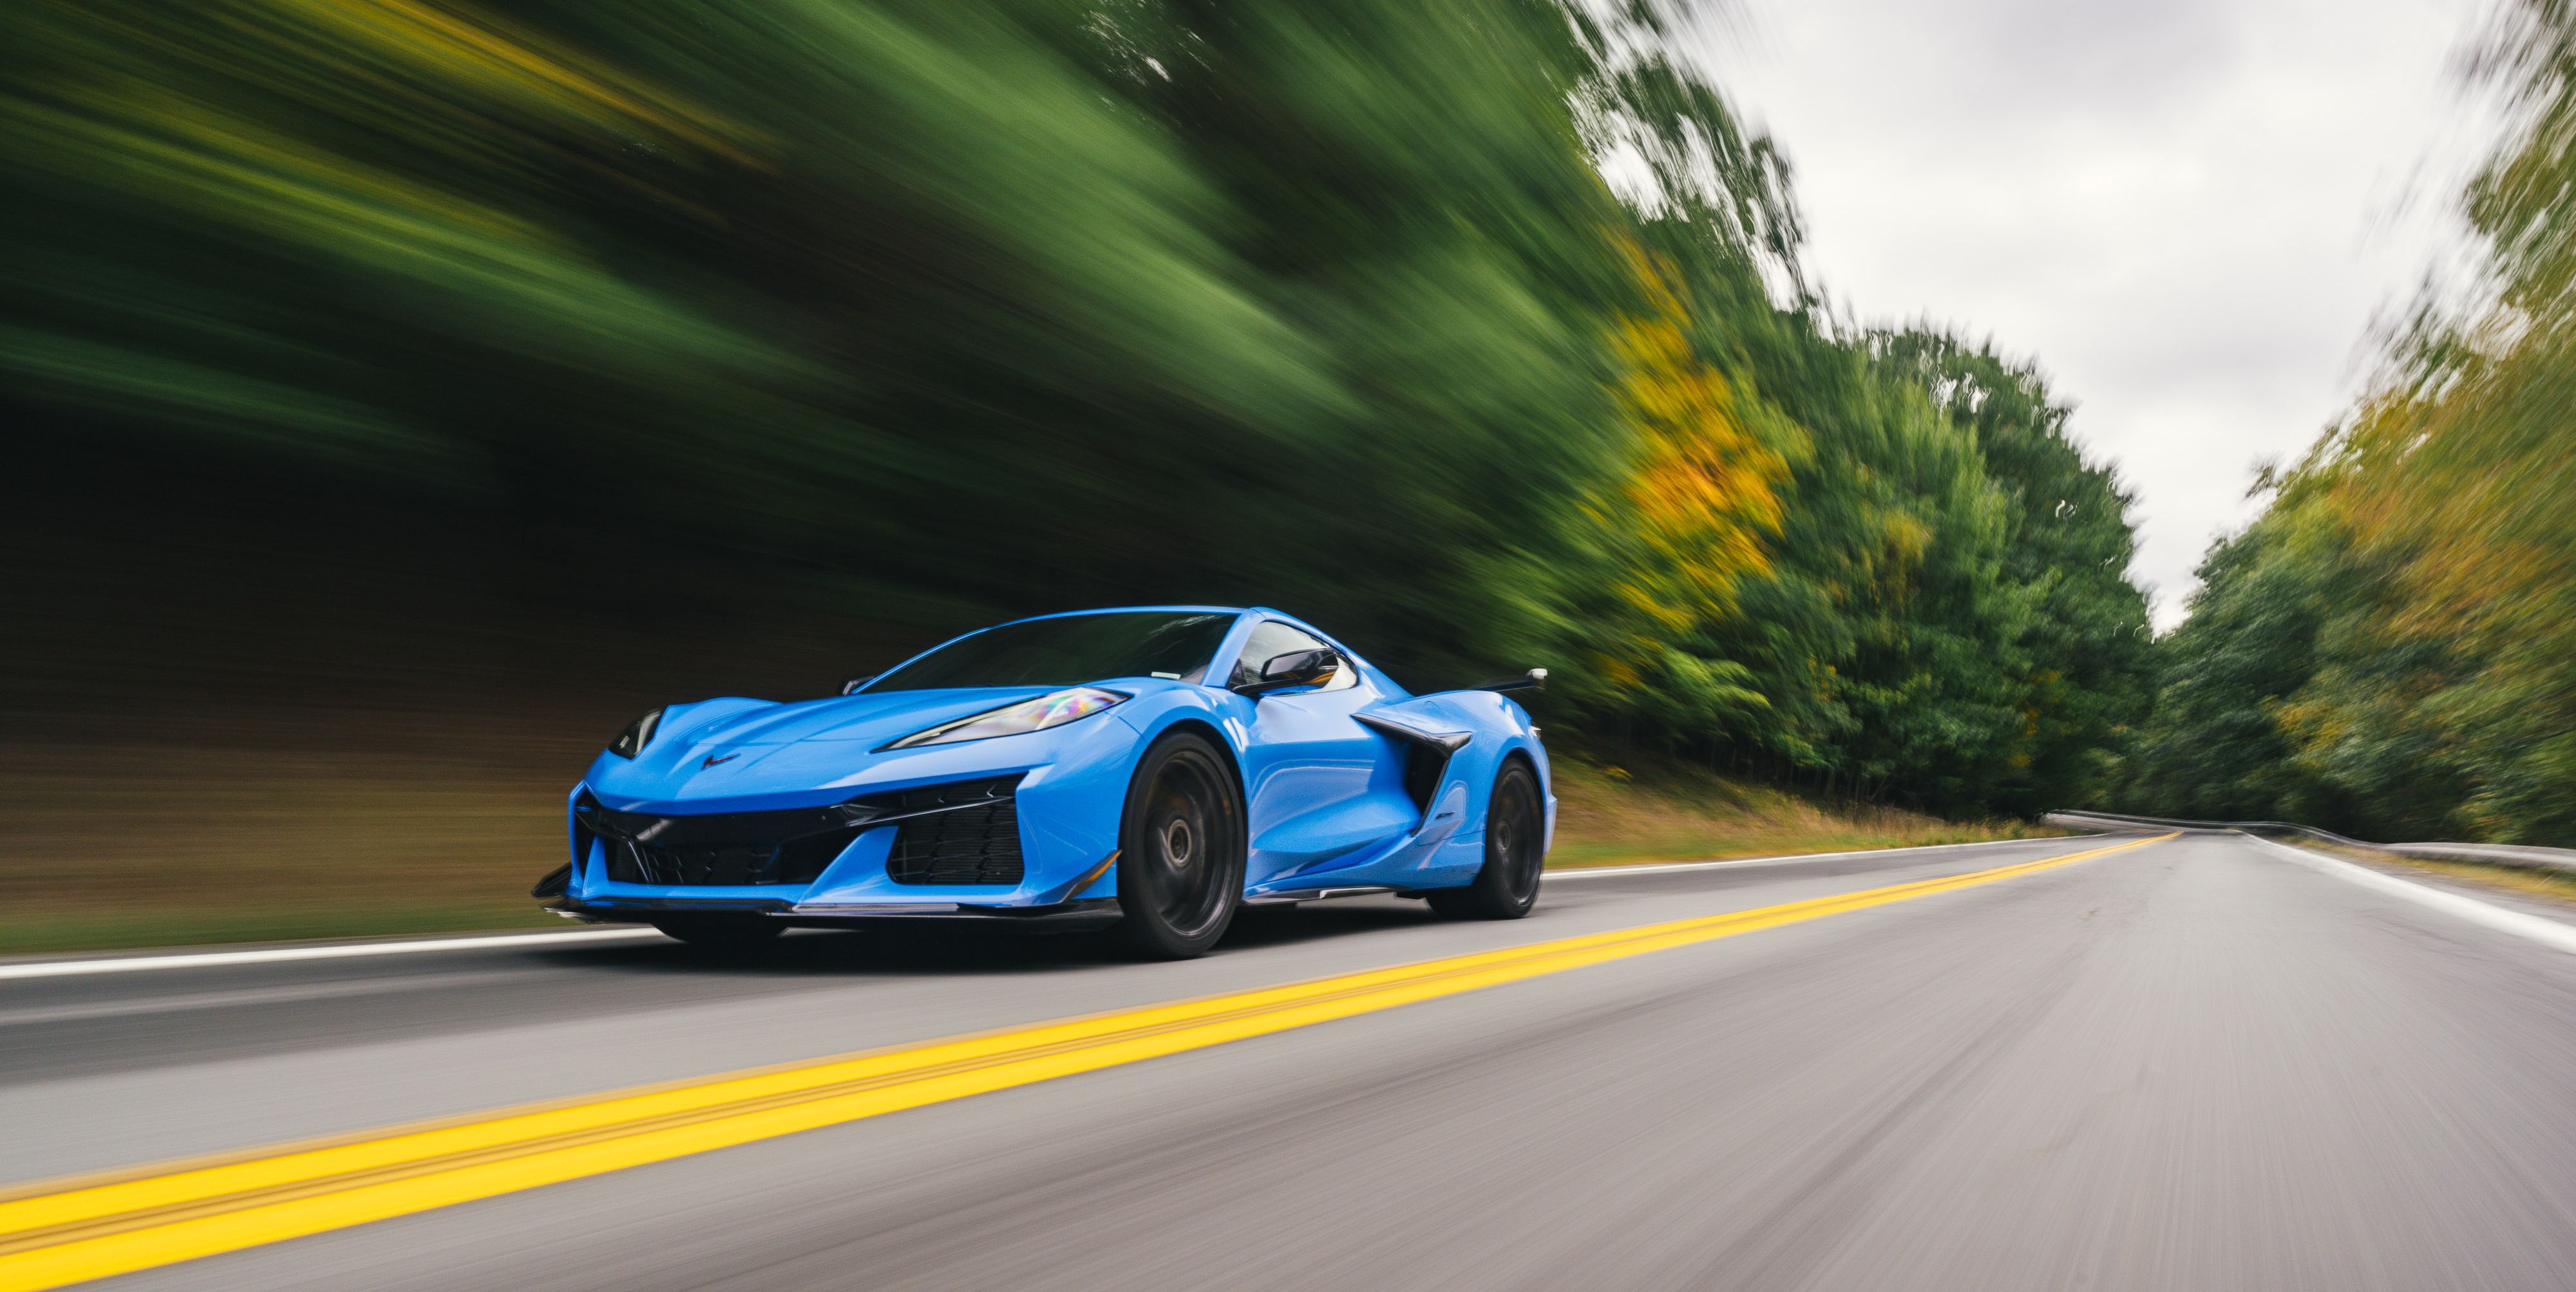 First Drive Review: The 2023 Chevrolet Corvette Z06 Is Astonishing